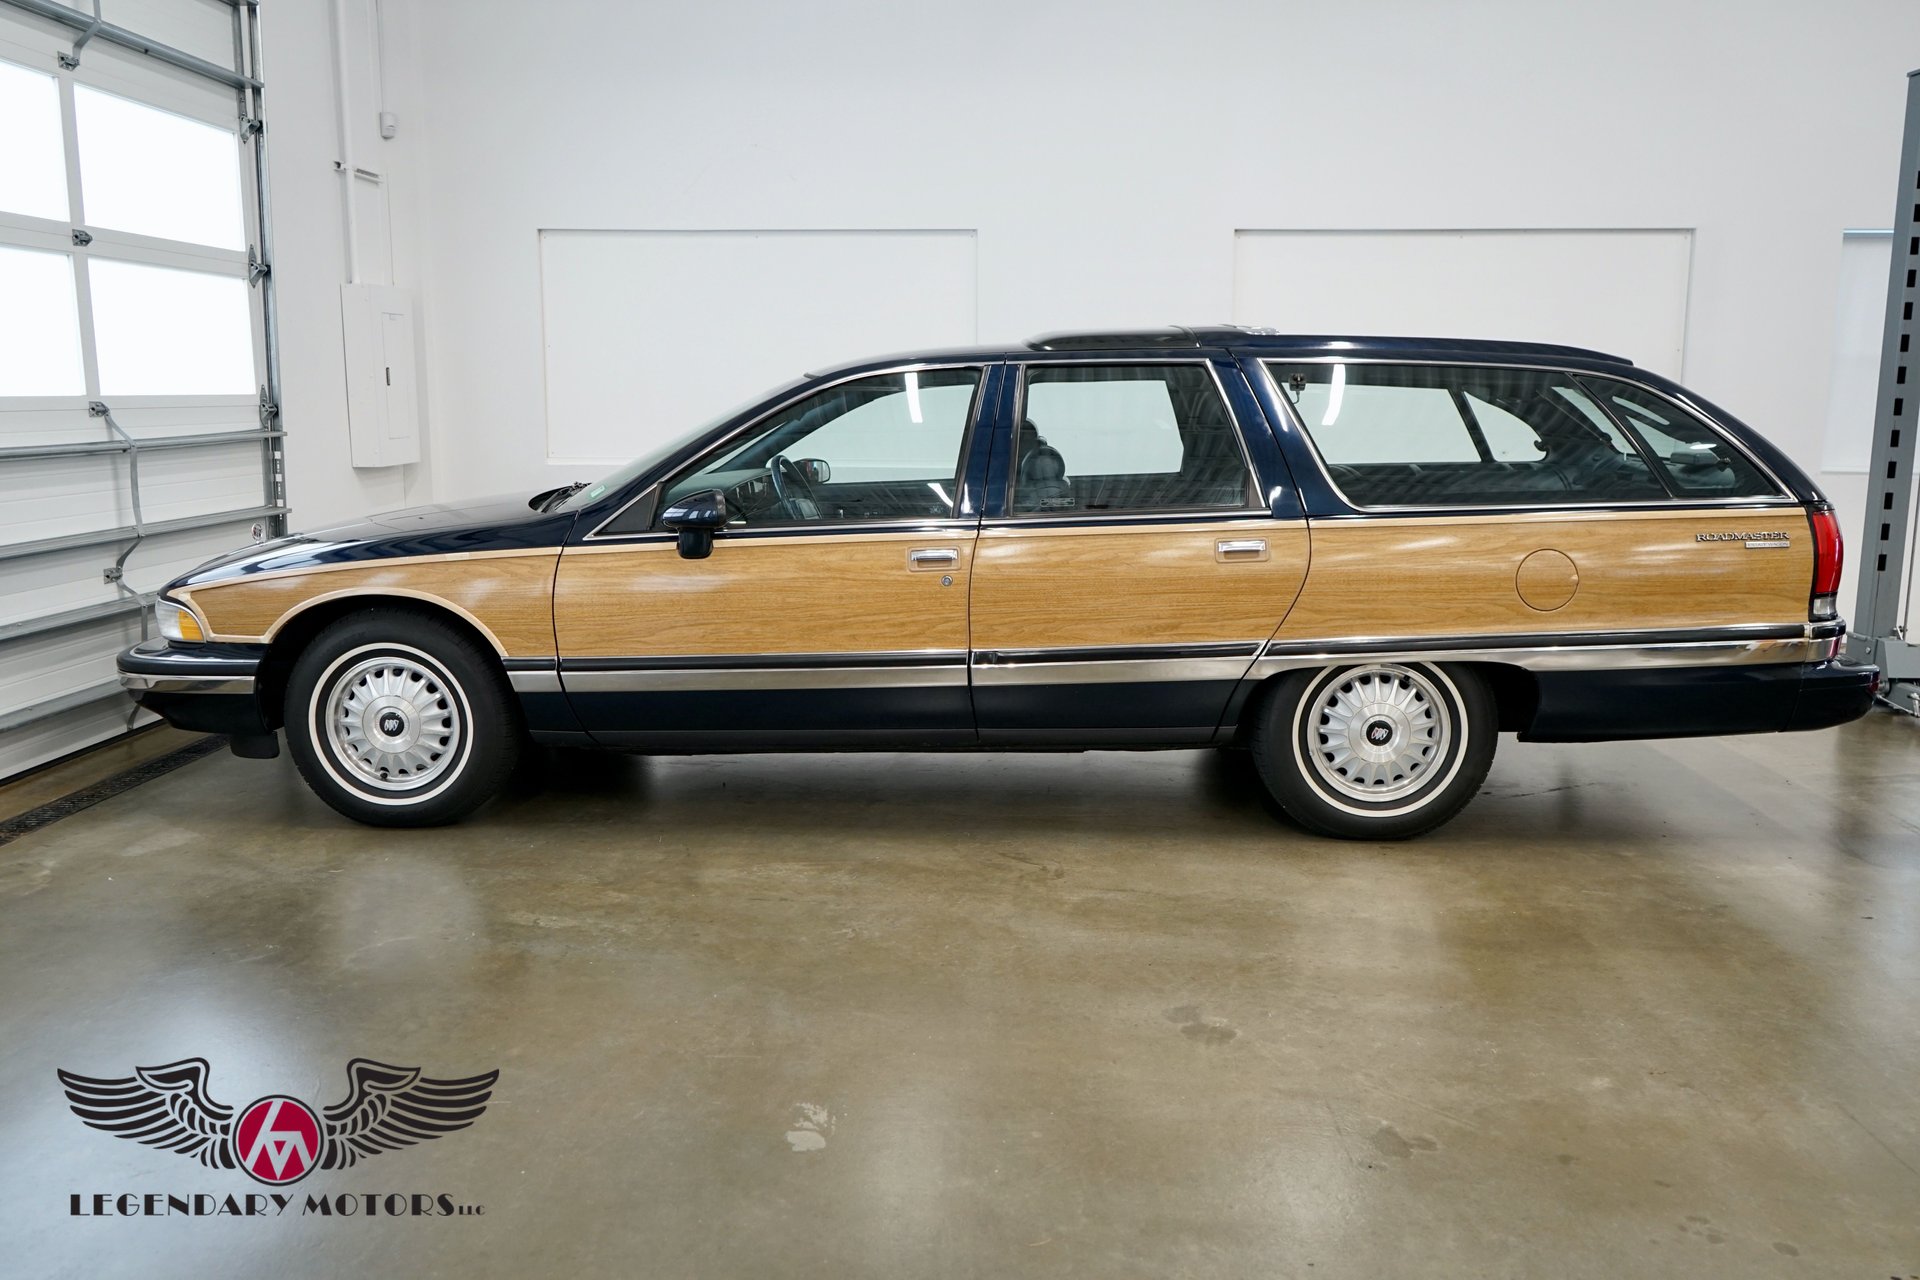 1992 Buick Roadmaster | Legendary Motors - Classic Cars, Muscle Cars, Hot  Rods & Antique Cars - Rowley, MA